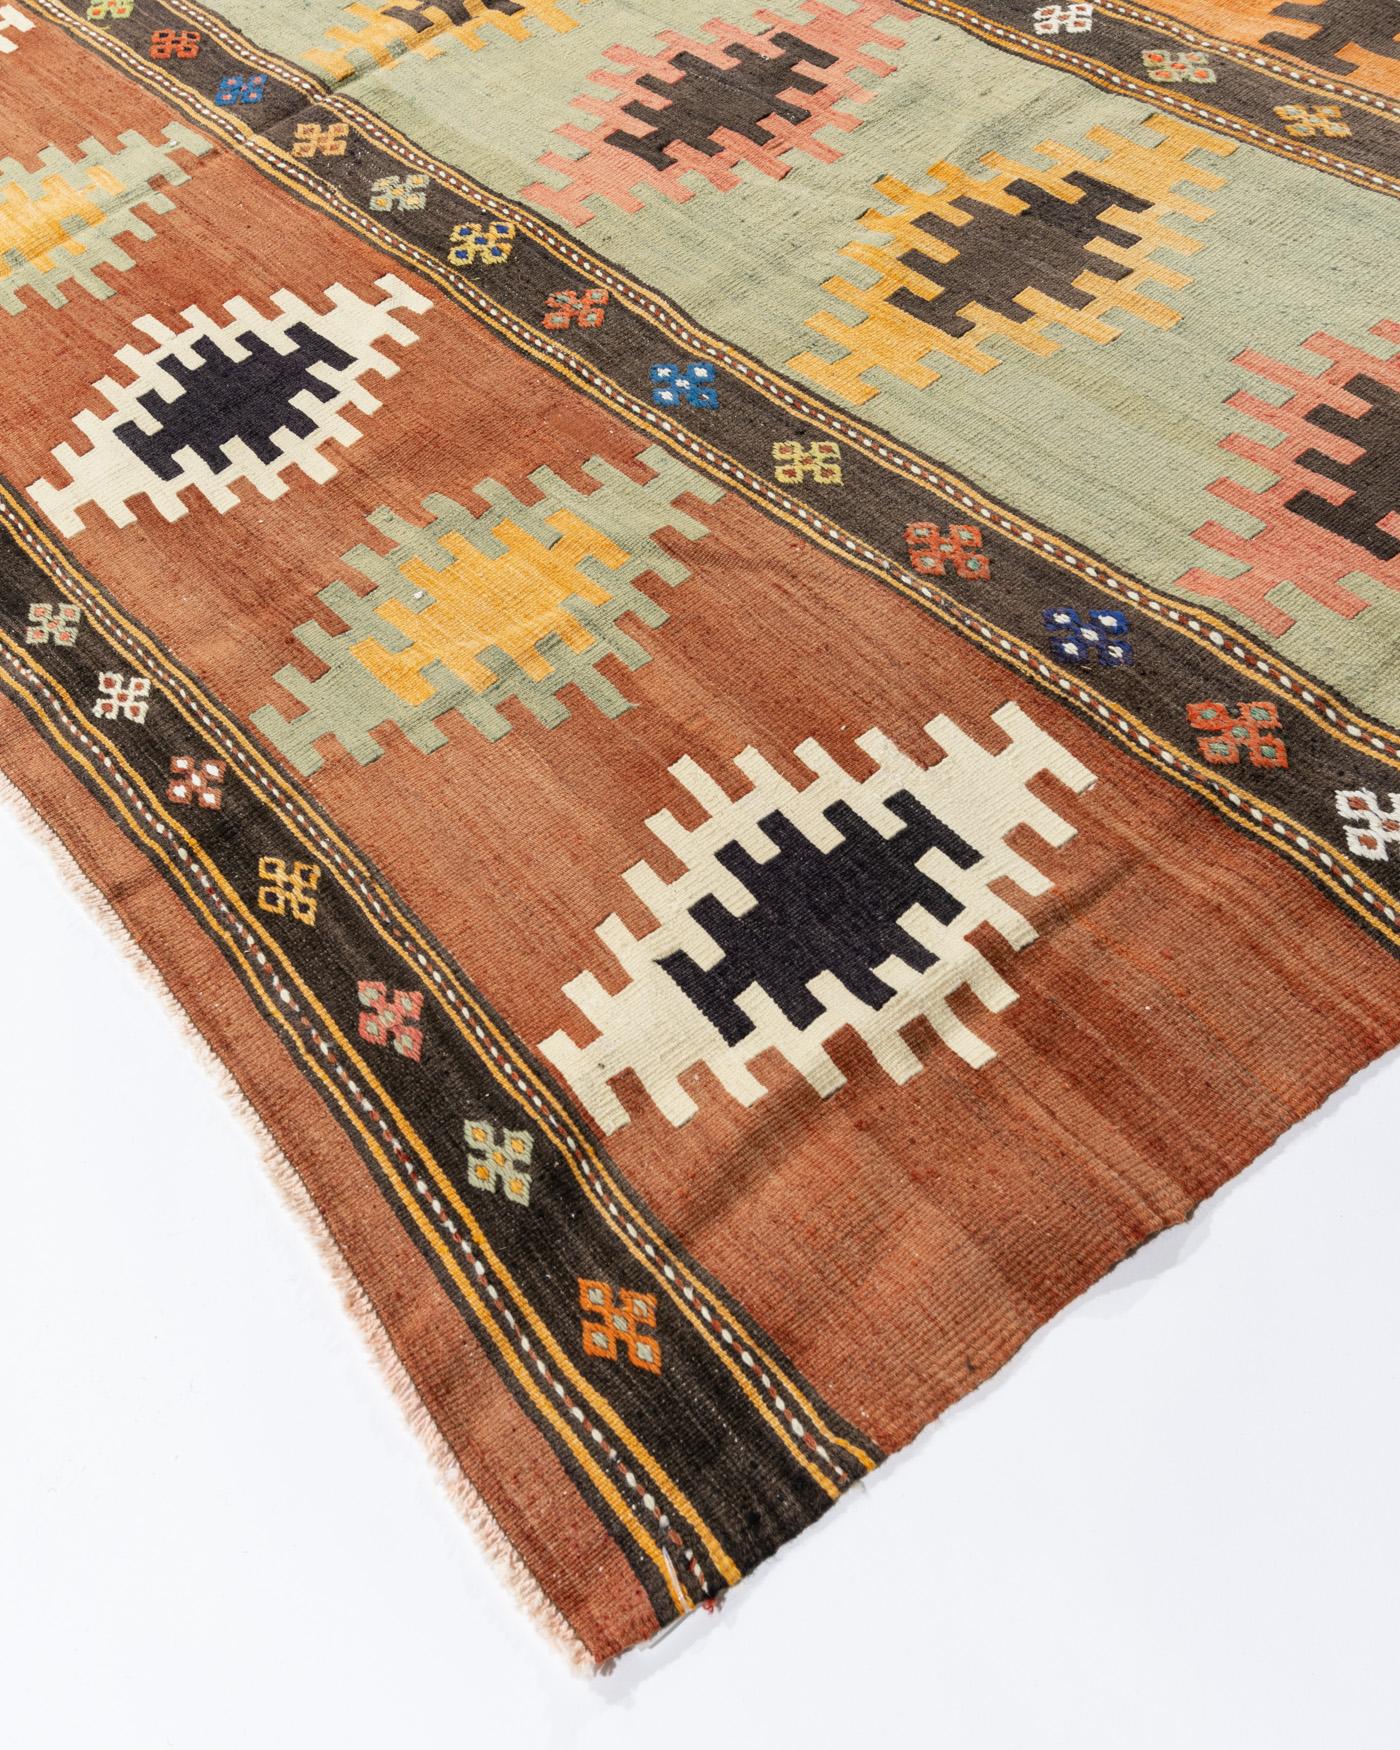 Vintage Turkish Kilim rug 6'10 X 12'7. This vintage Turkish flat weave Kilim was hand-woven in the 1950's. The simplicity and boldness of this piece can also give a contemporary feel and is able to look at home in both a modern or traditional